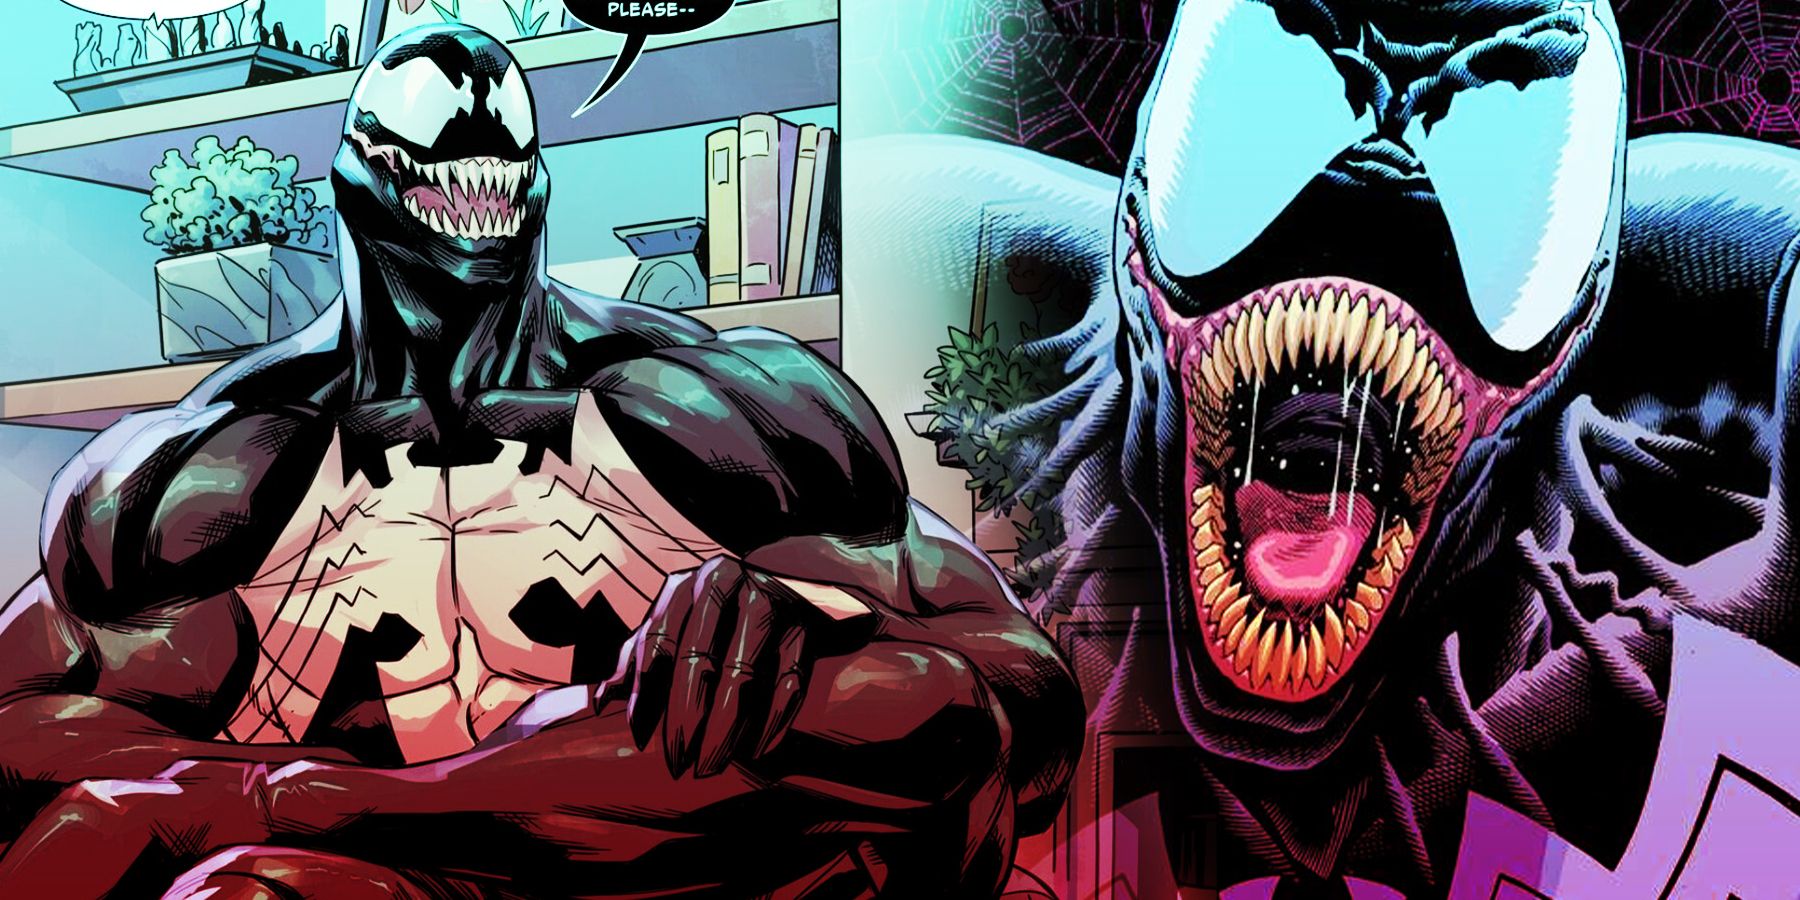 On the left, Venom sits casually with legs crossed. On the right, Venom is bursting forward with mouth wide open.